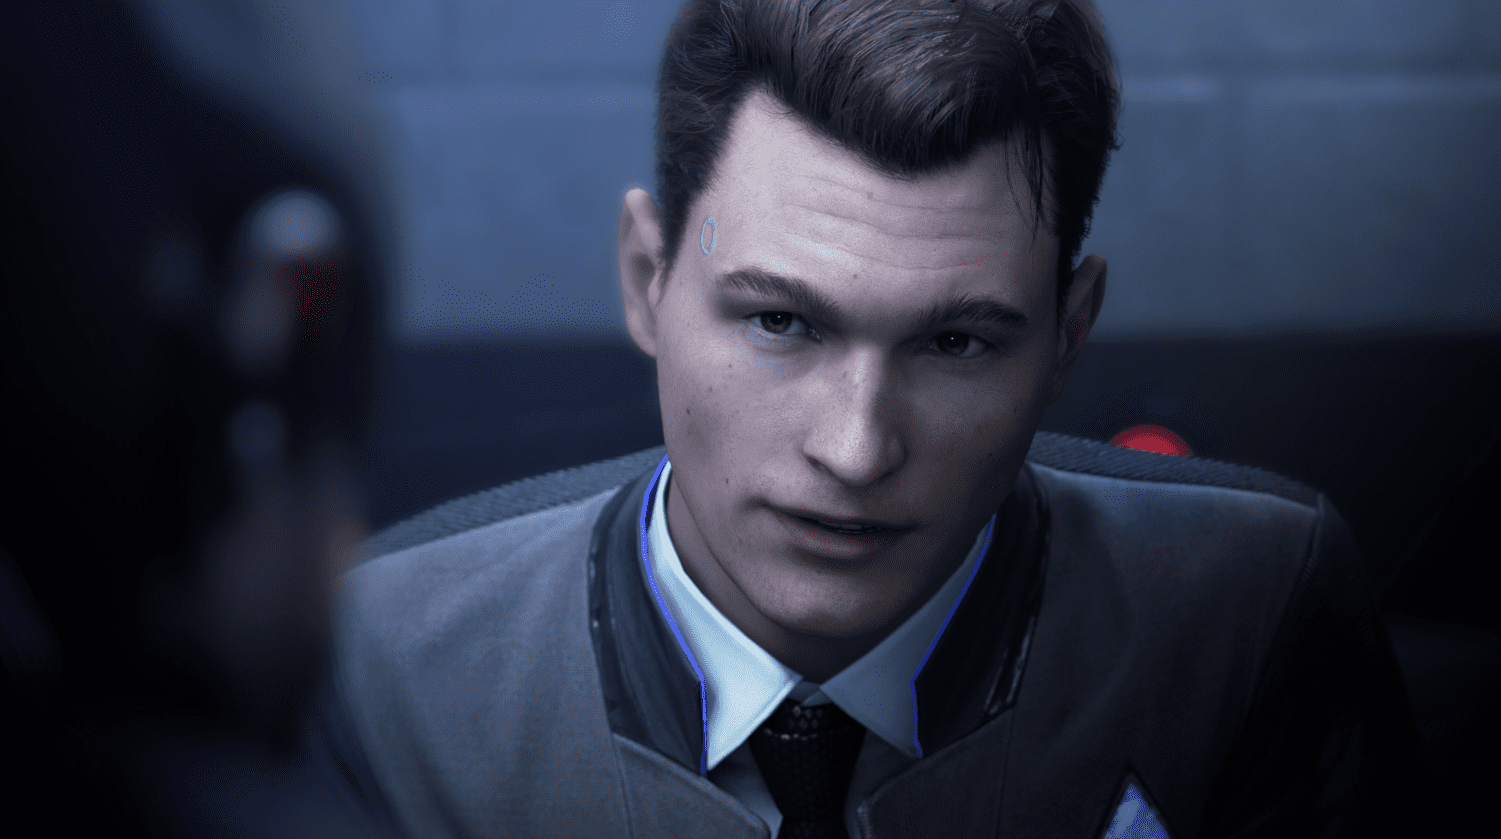 Detroit: Become Human Developer Ordered To Pay Over Offensive Photos